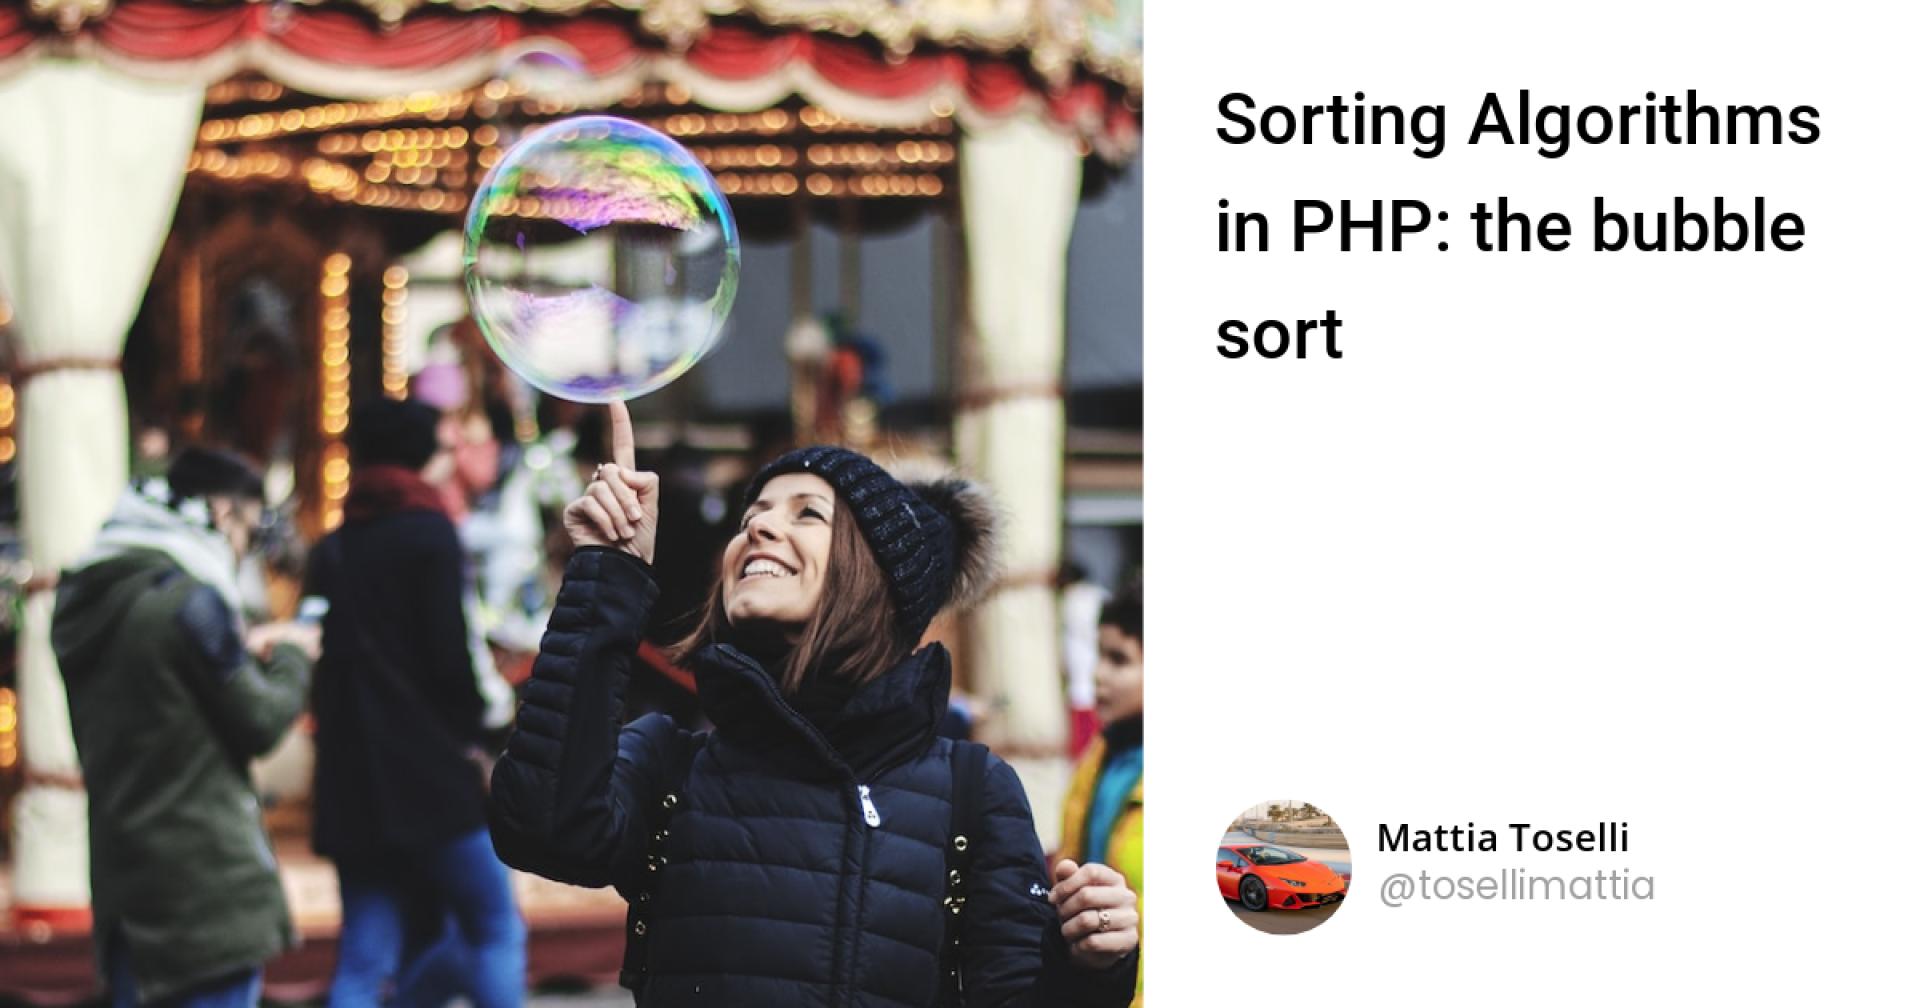 Sorting Algorithms in PHP: the bubble sort